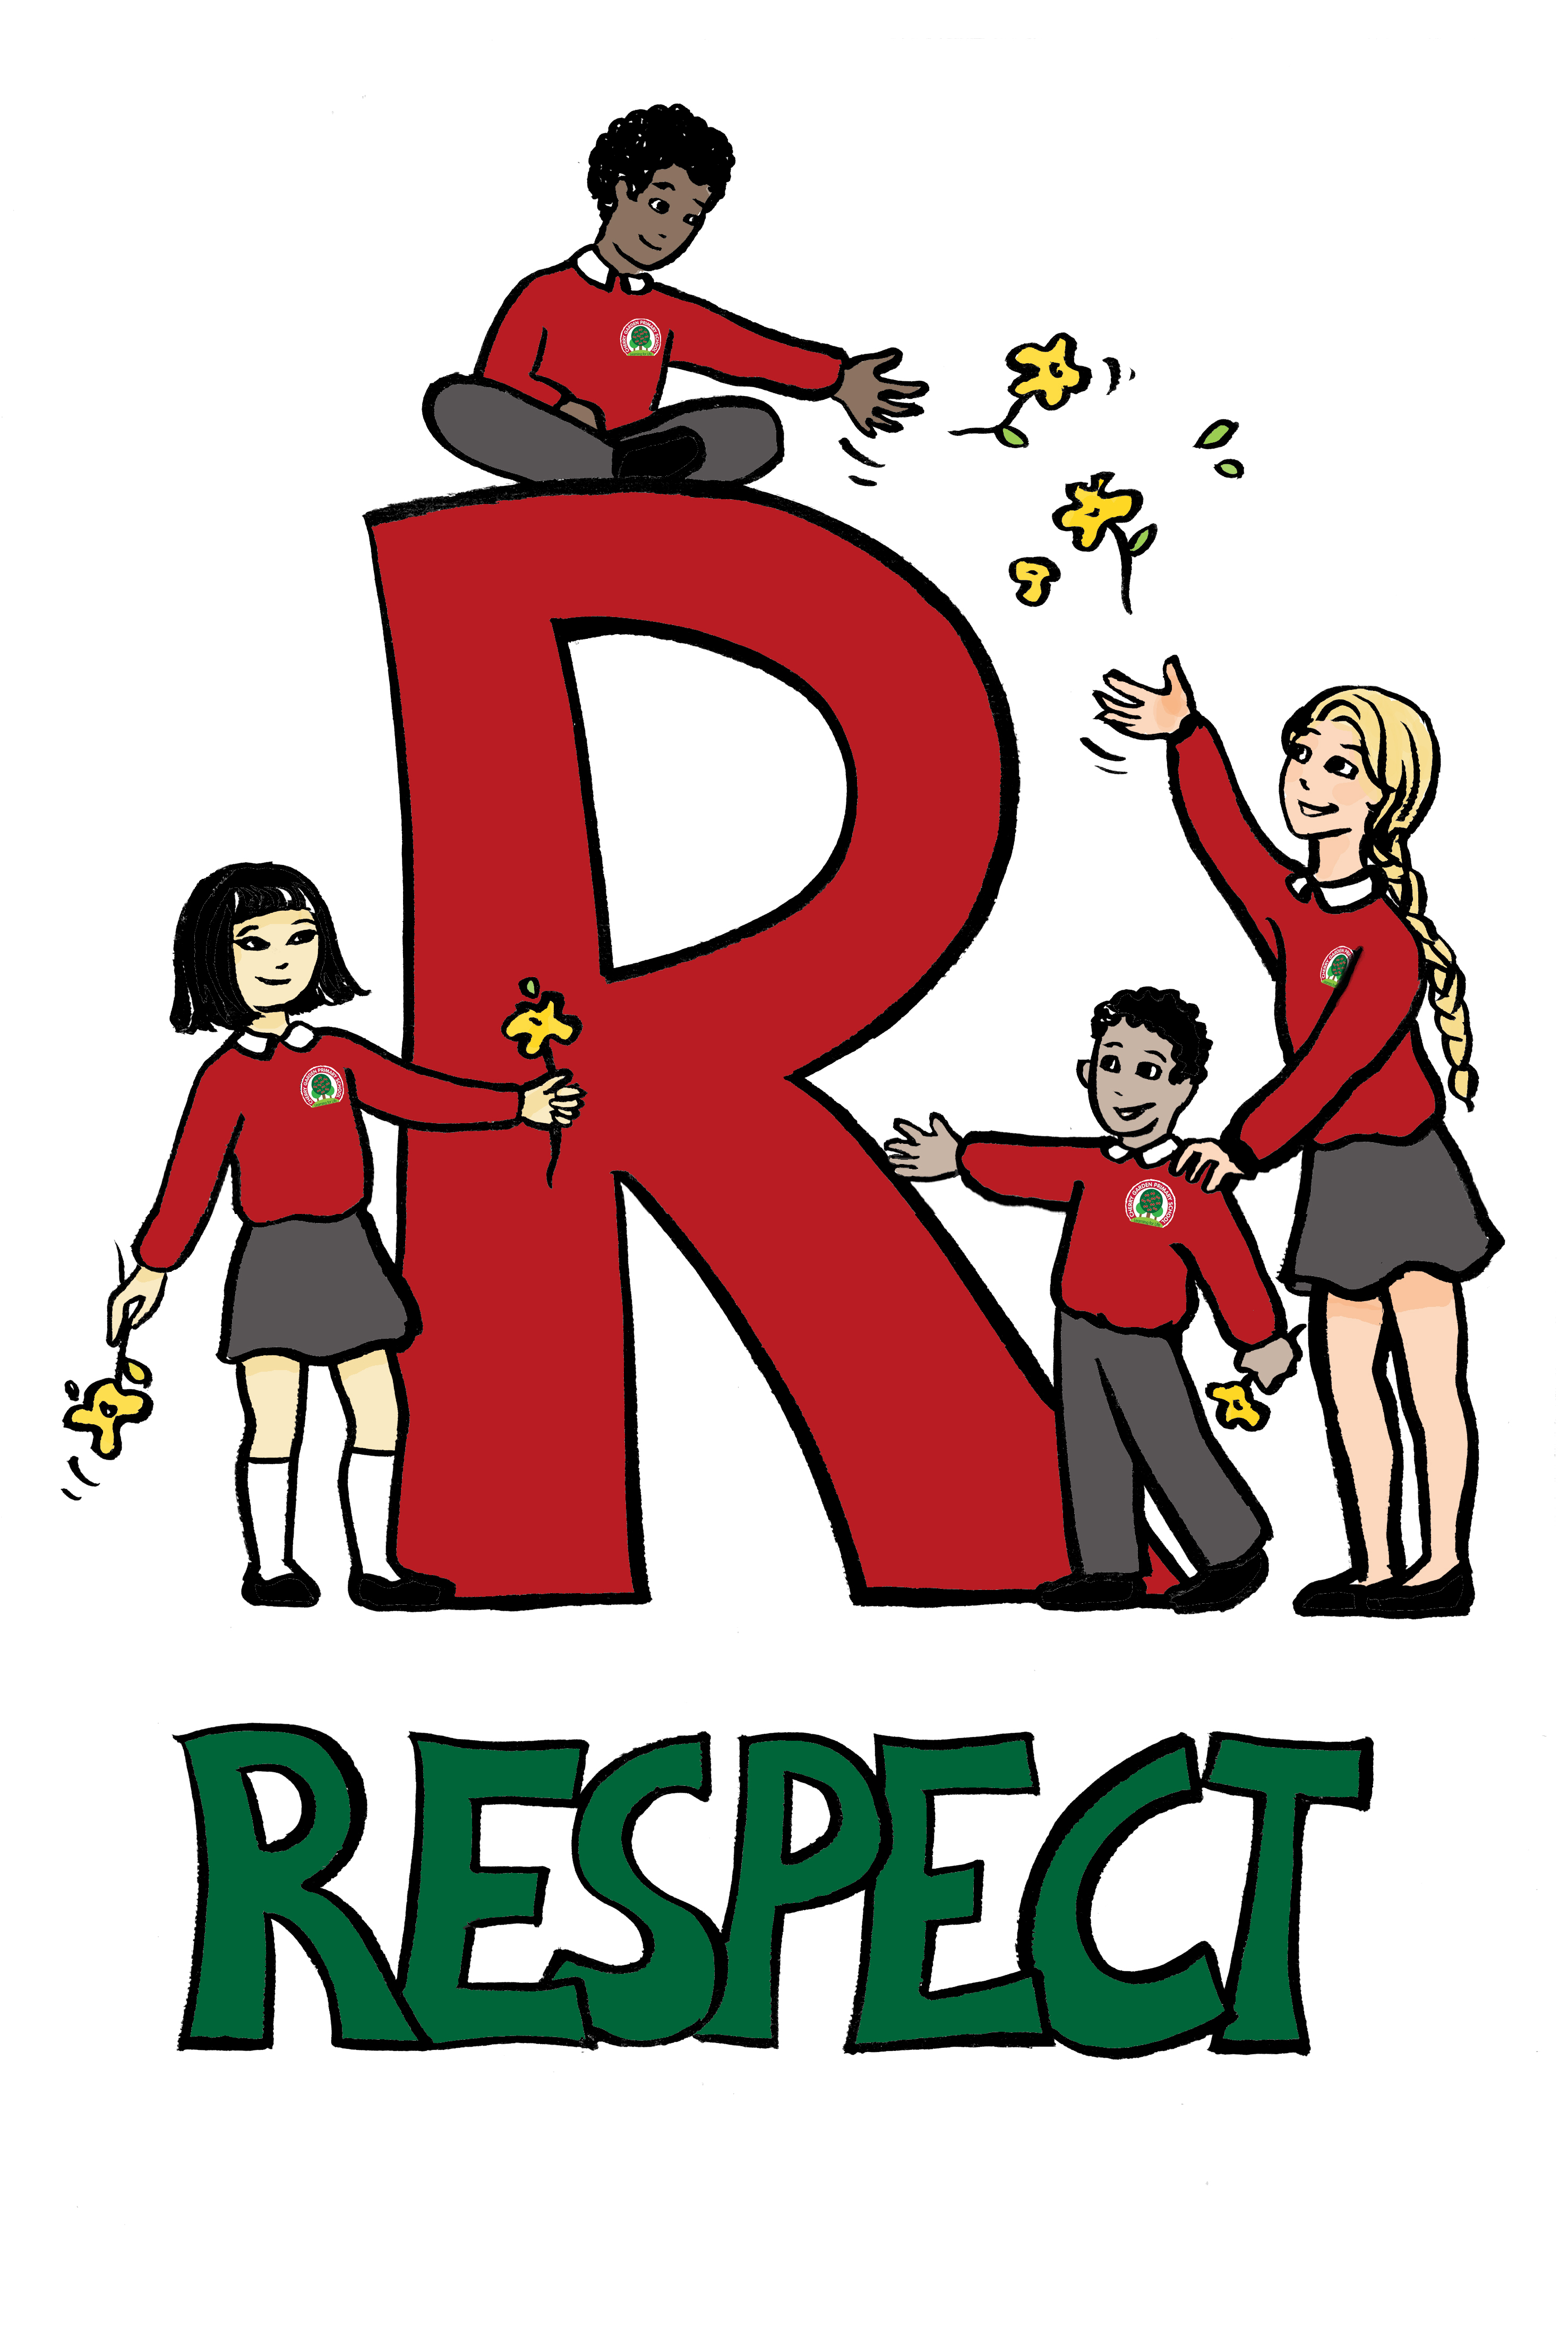 Showing Respect Clipart.